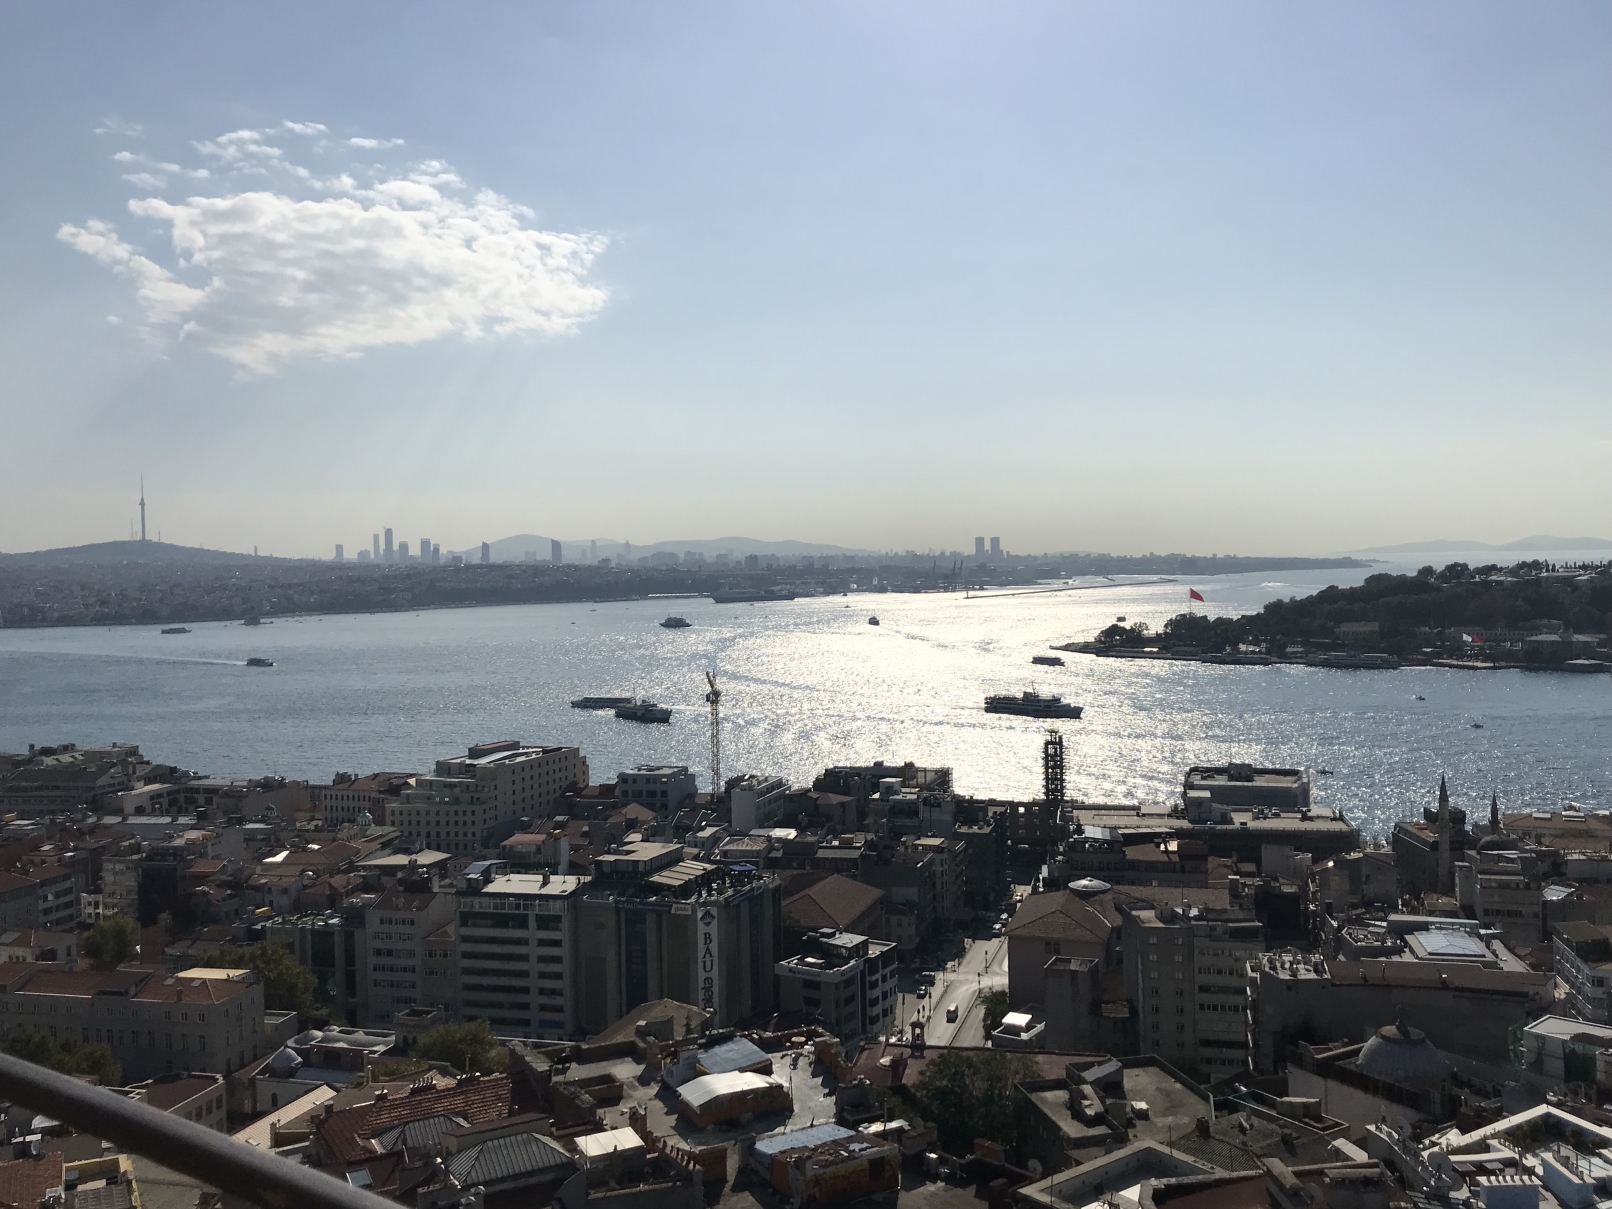 The view from the Galata Tower, city of Istanbul